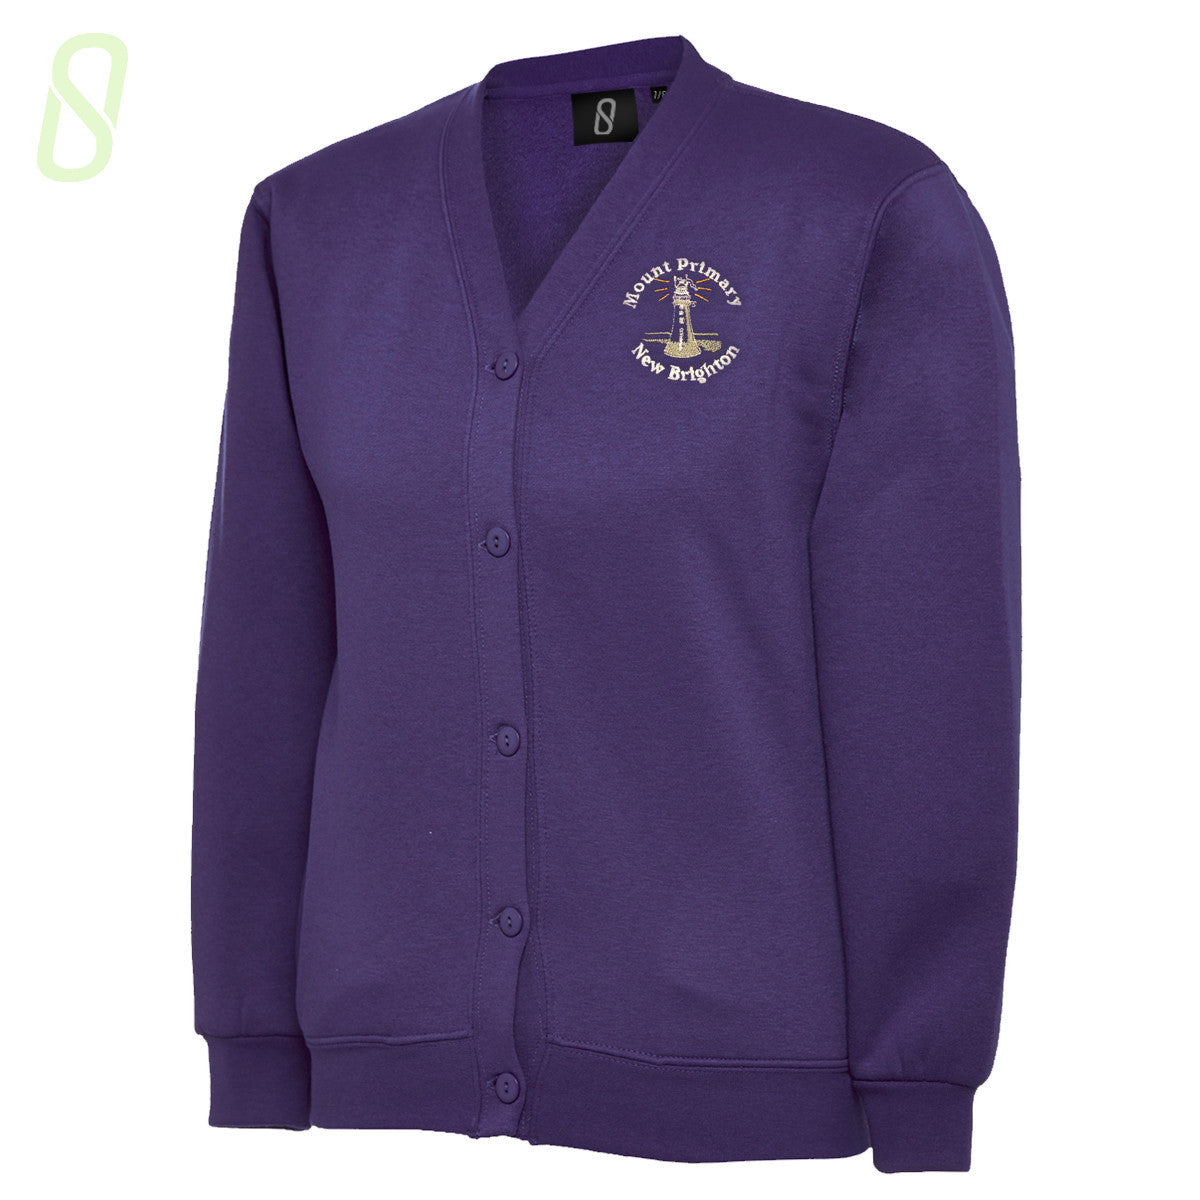 Mount Primary School Cardigan, purple sweatshirt cardigan with pockets - The Schoolwear Outlet - Shop Now